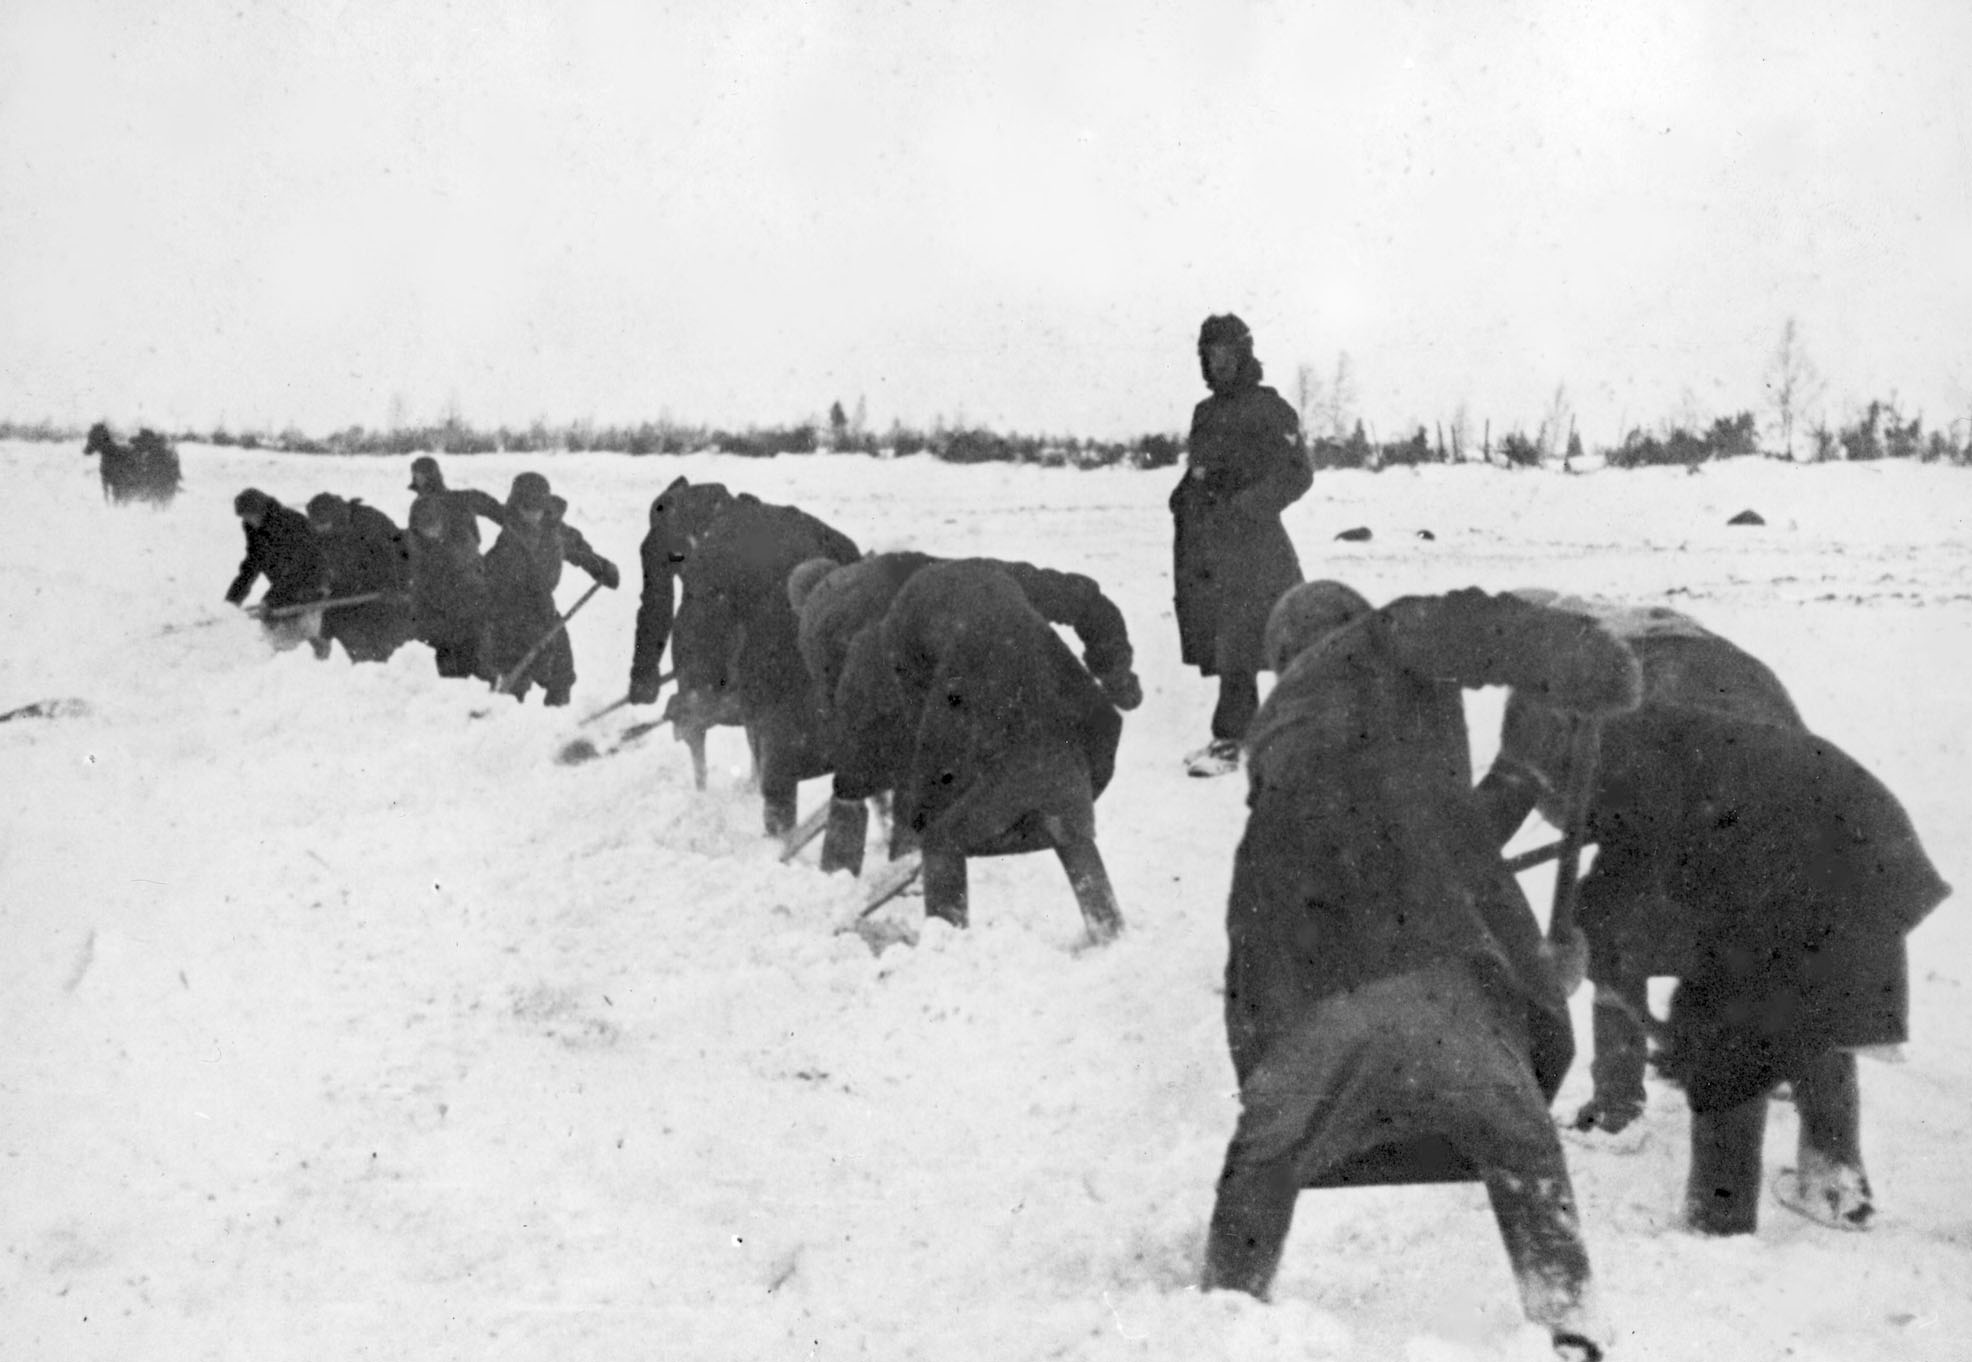 A German overseer guards Soviet prisoners as they are forced to perform manual labor, while being deprived of food, water and shelter, circa 1941. / Polish State Archive